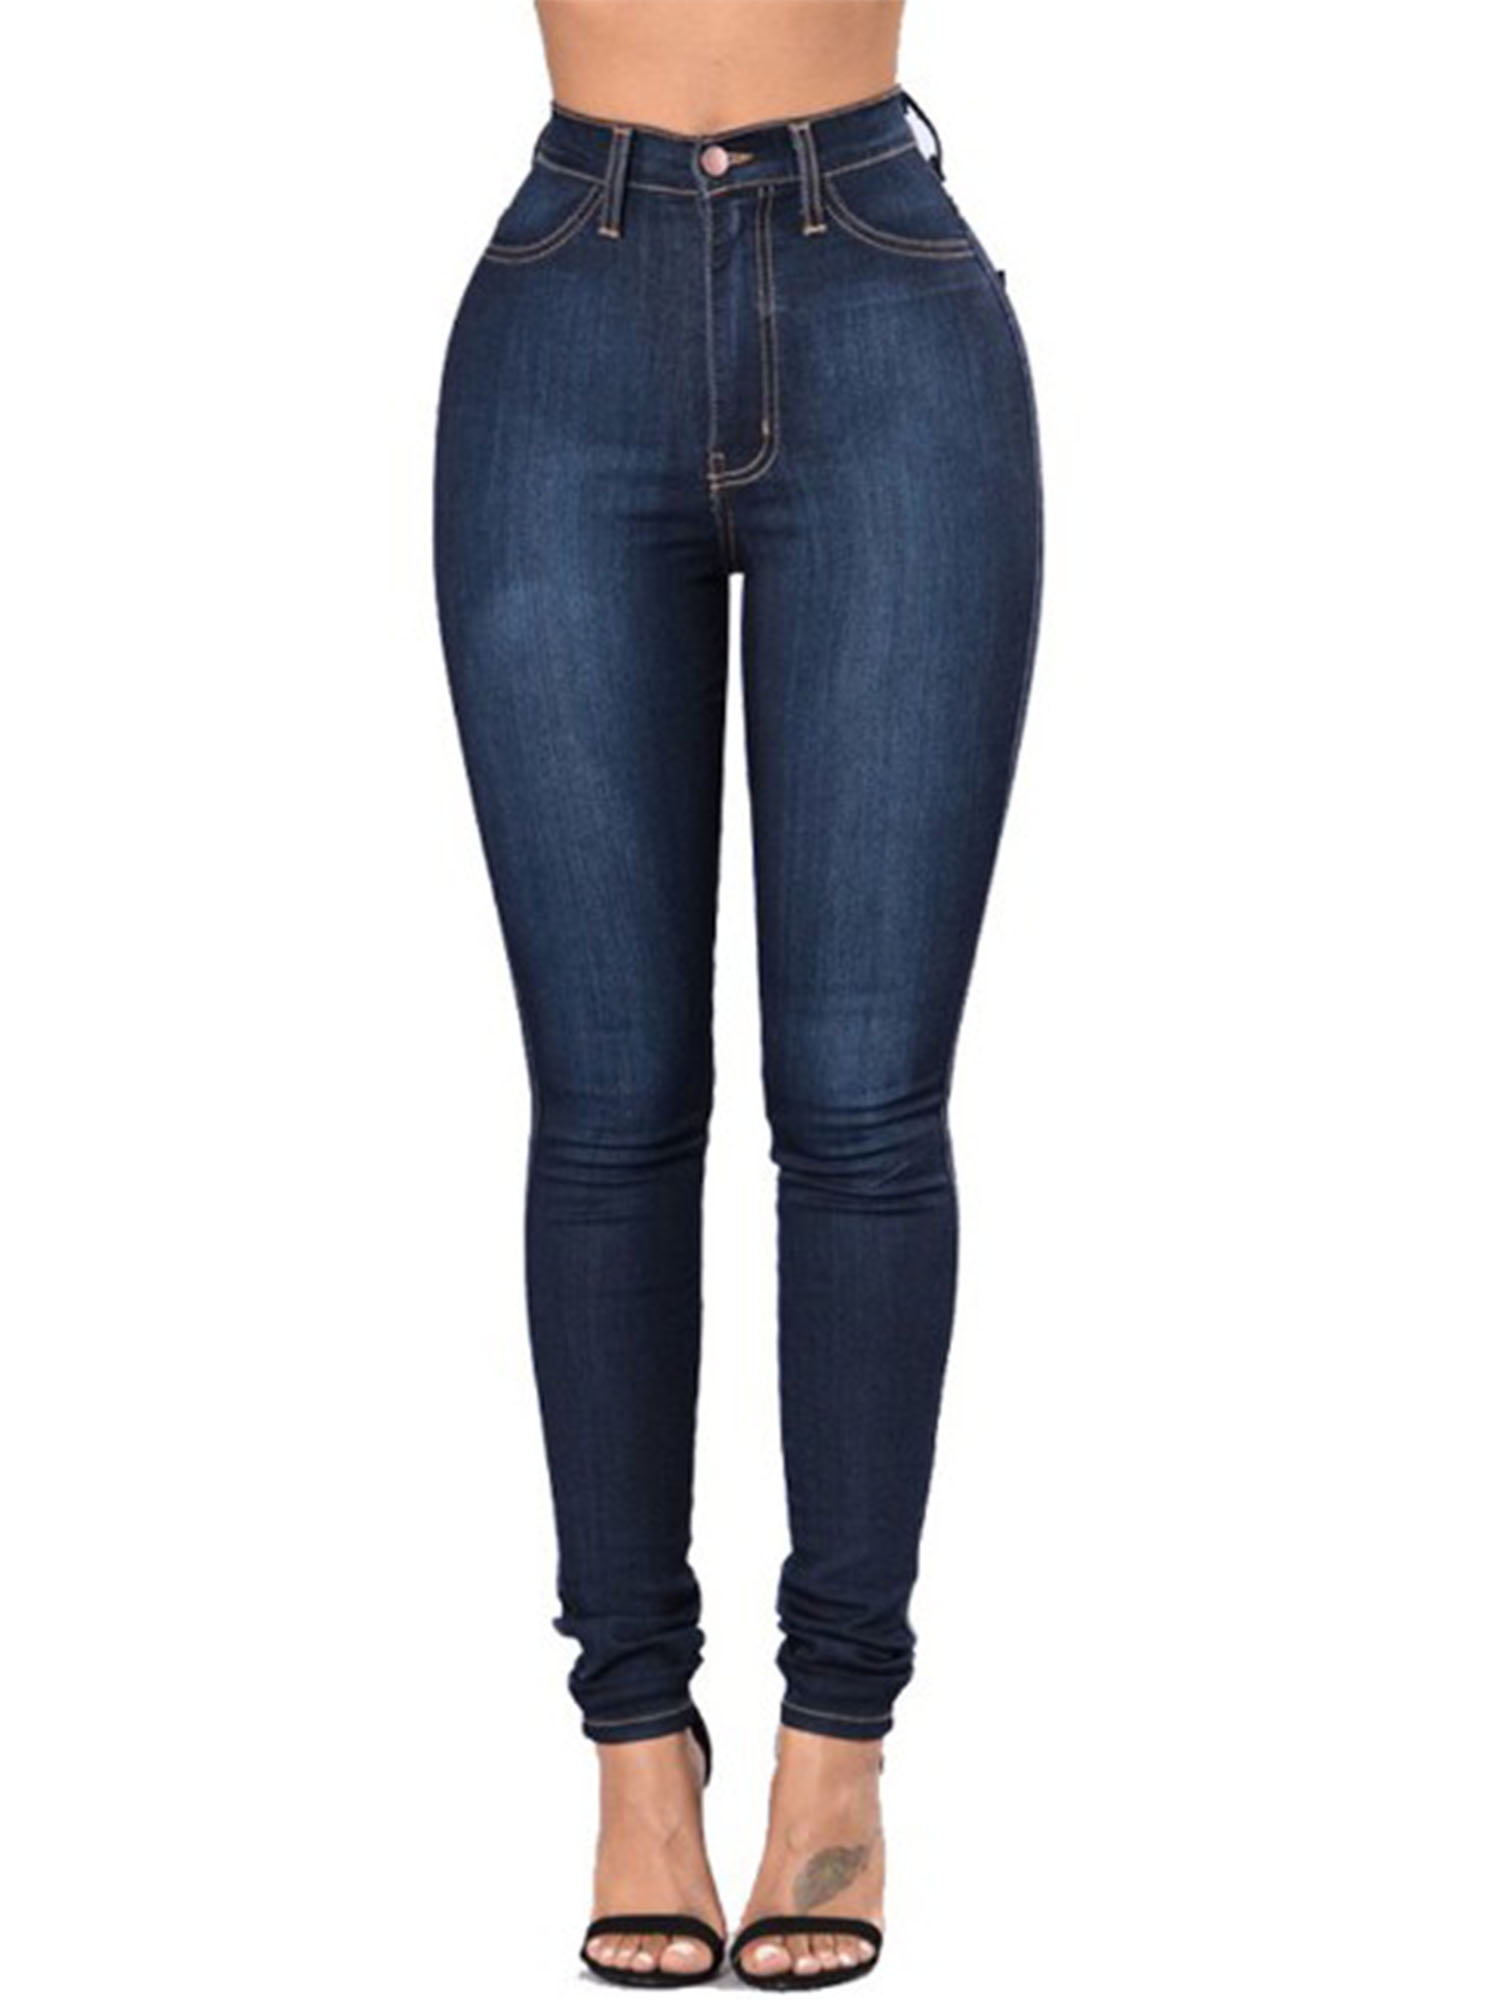 Frontwalk High Rise Skinny Jeans for Women Solid Color Stretchy